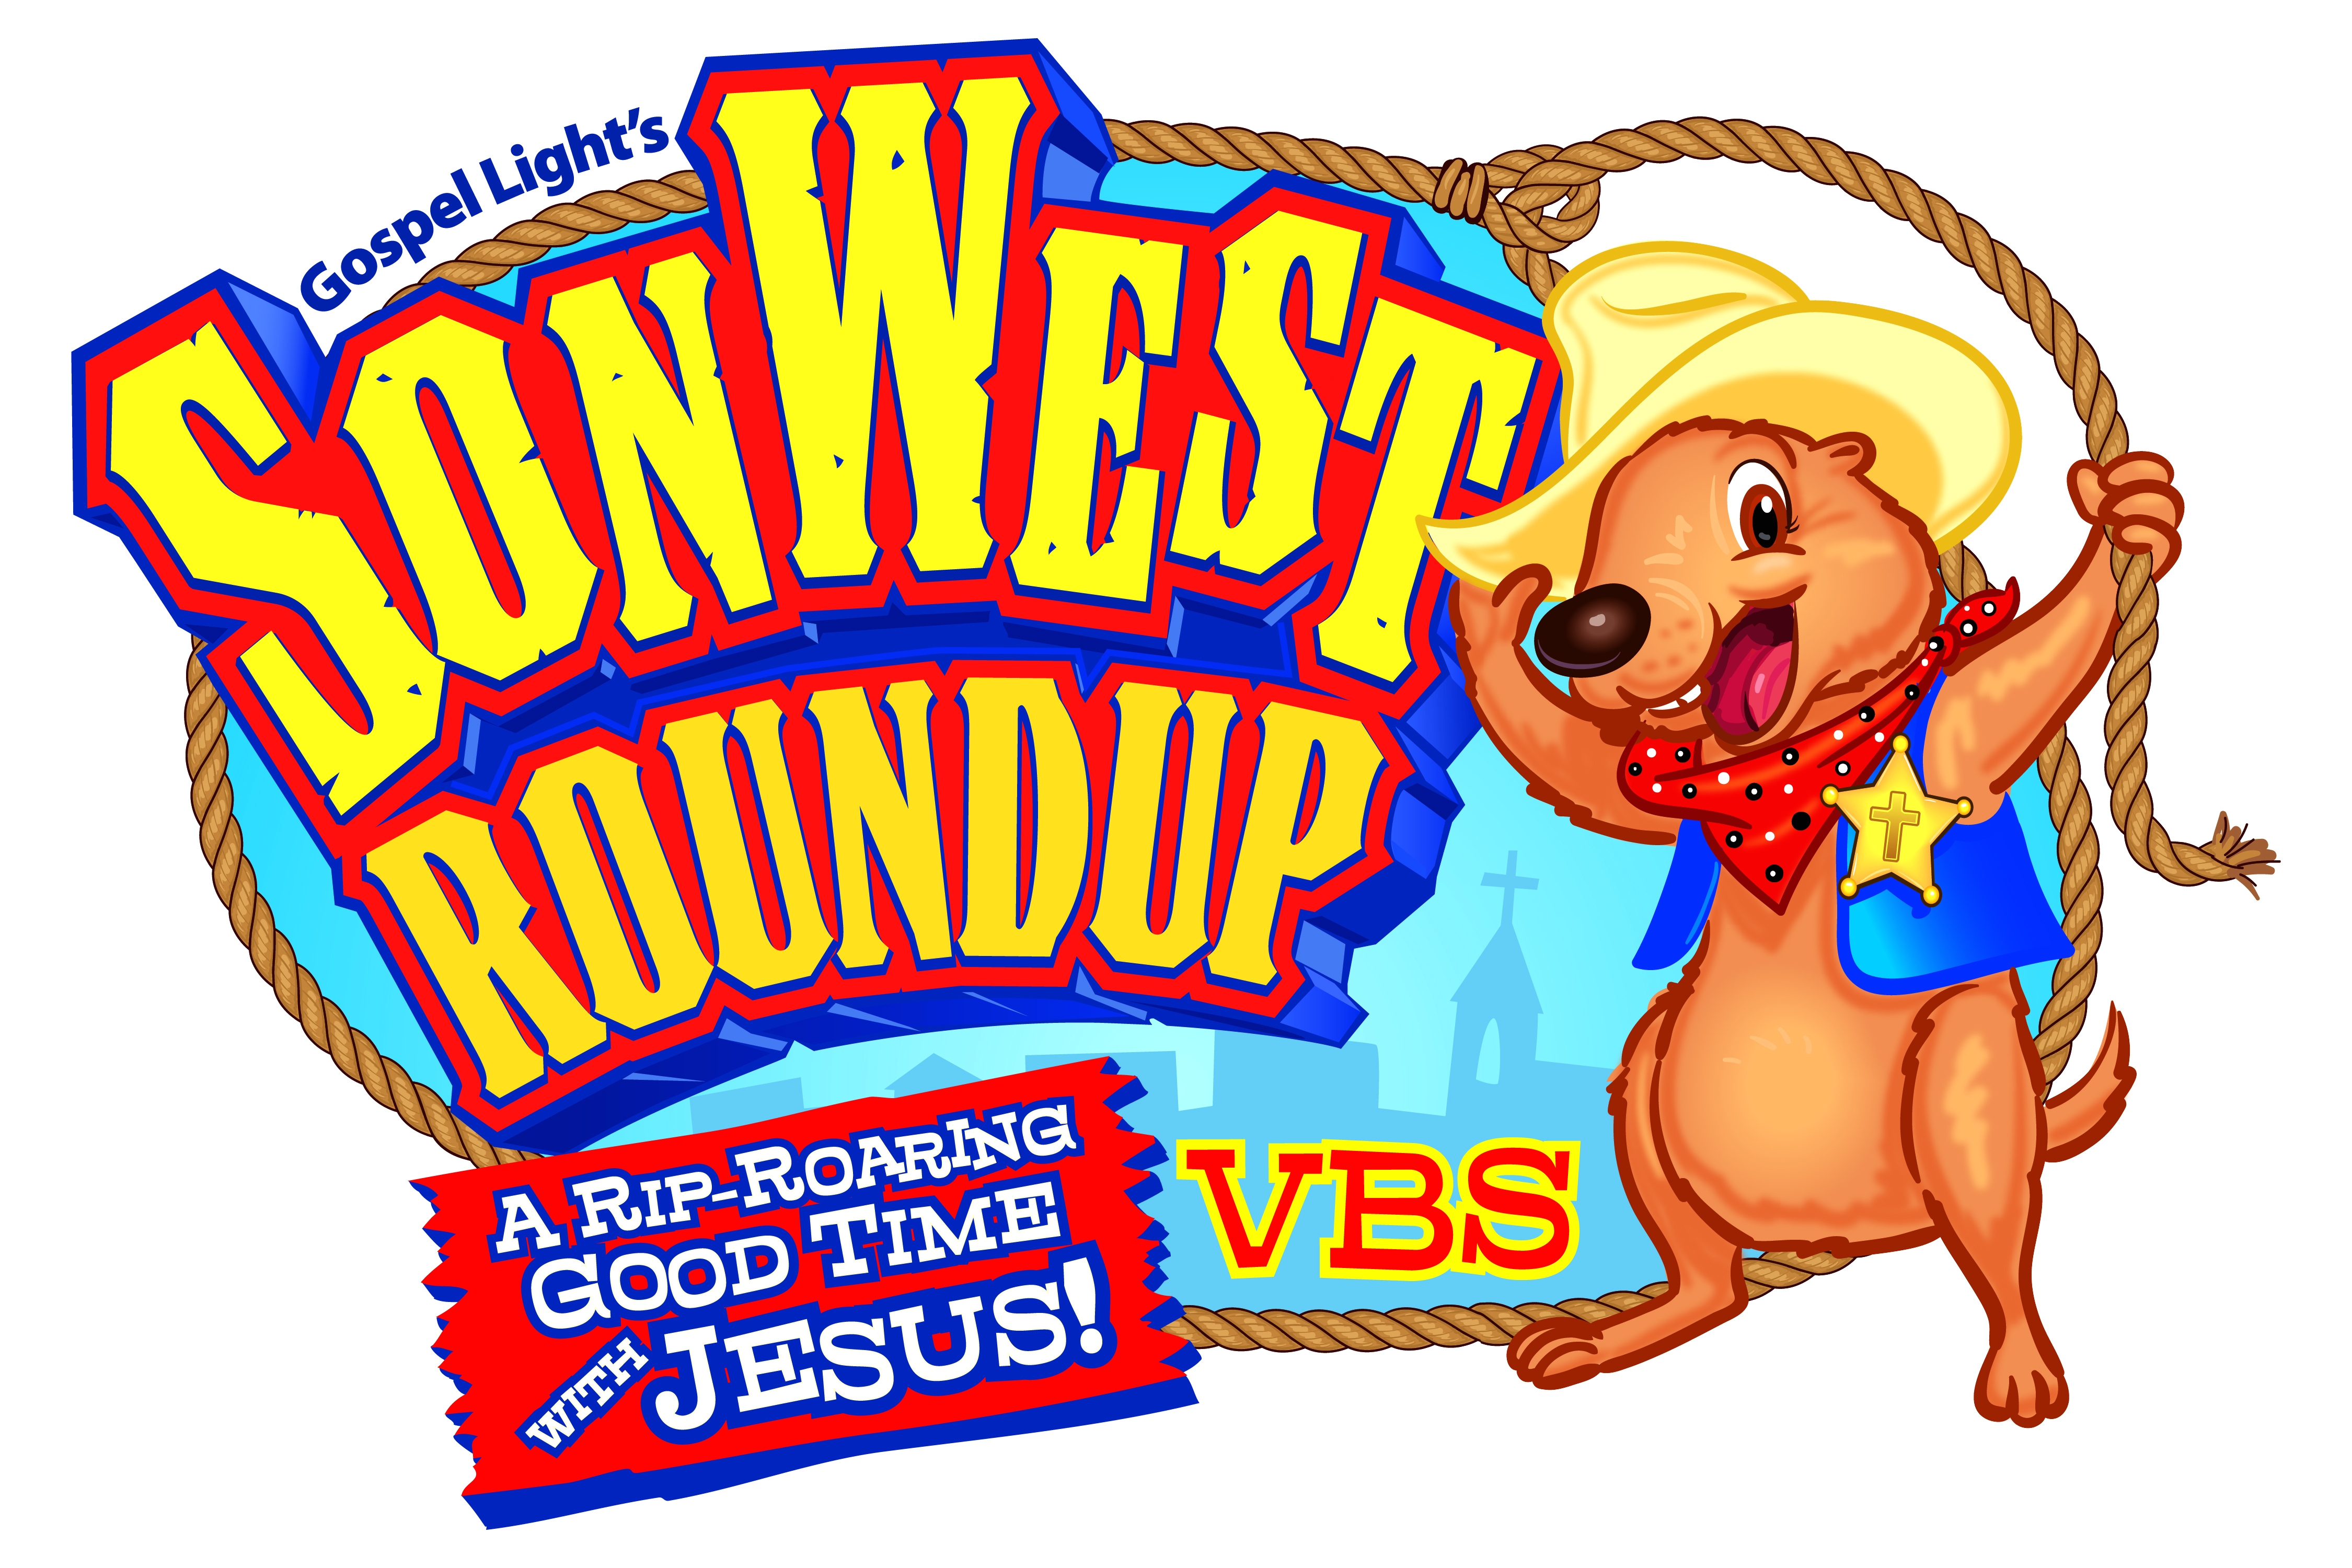 sonwest roundup vbs clipart 1